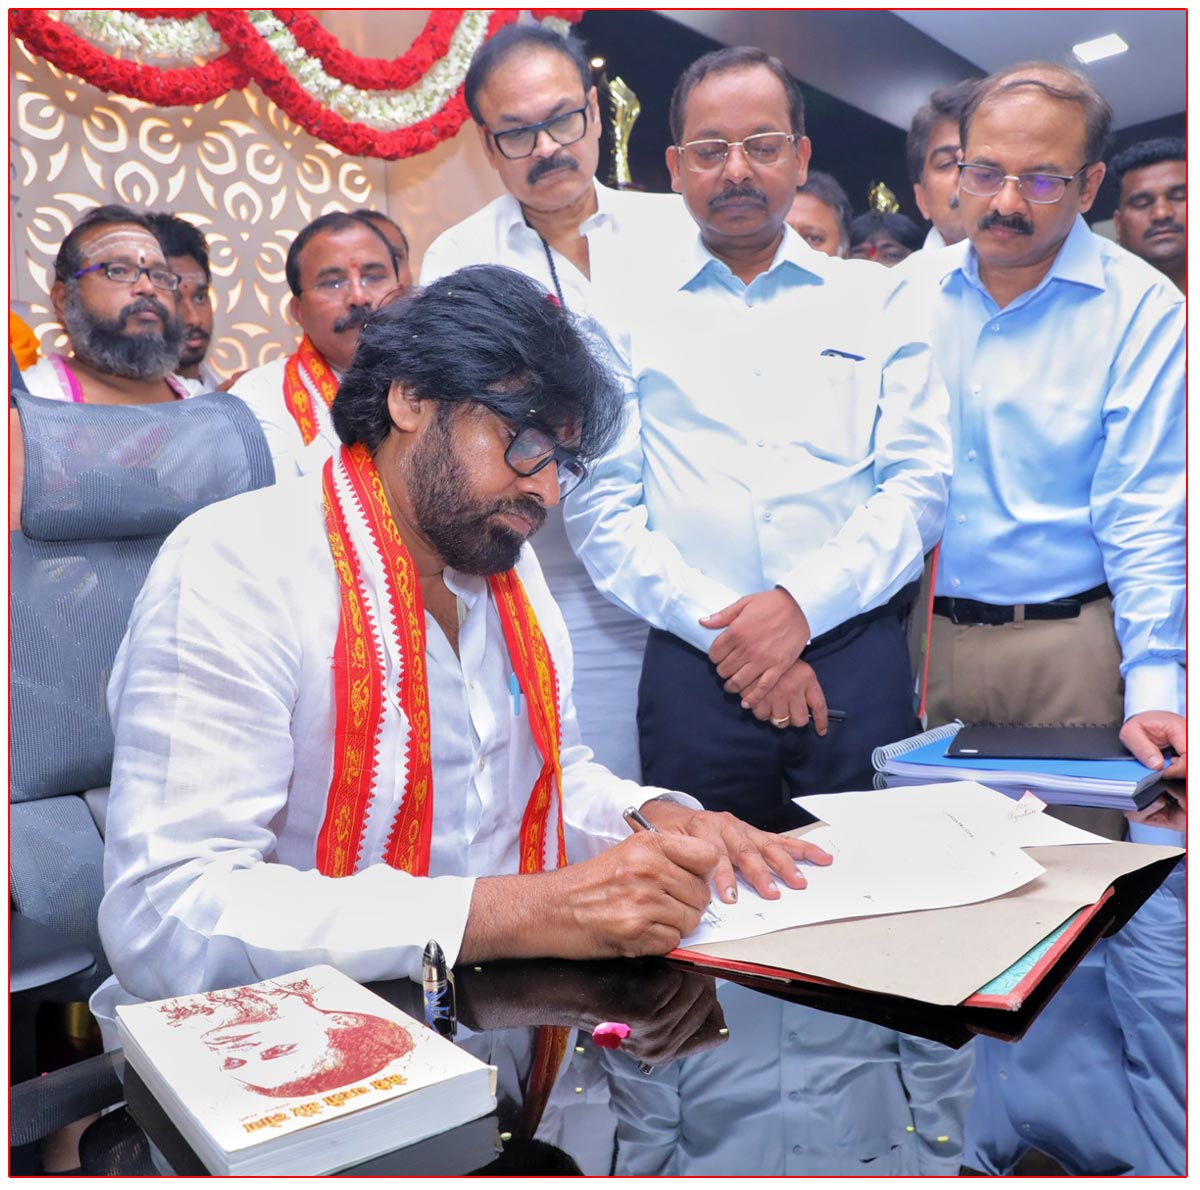 Pawan Kalyan officially took charge as the Deputy Chief Minister of Andhra Pradesh